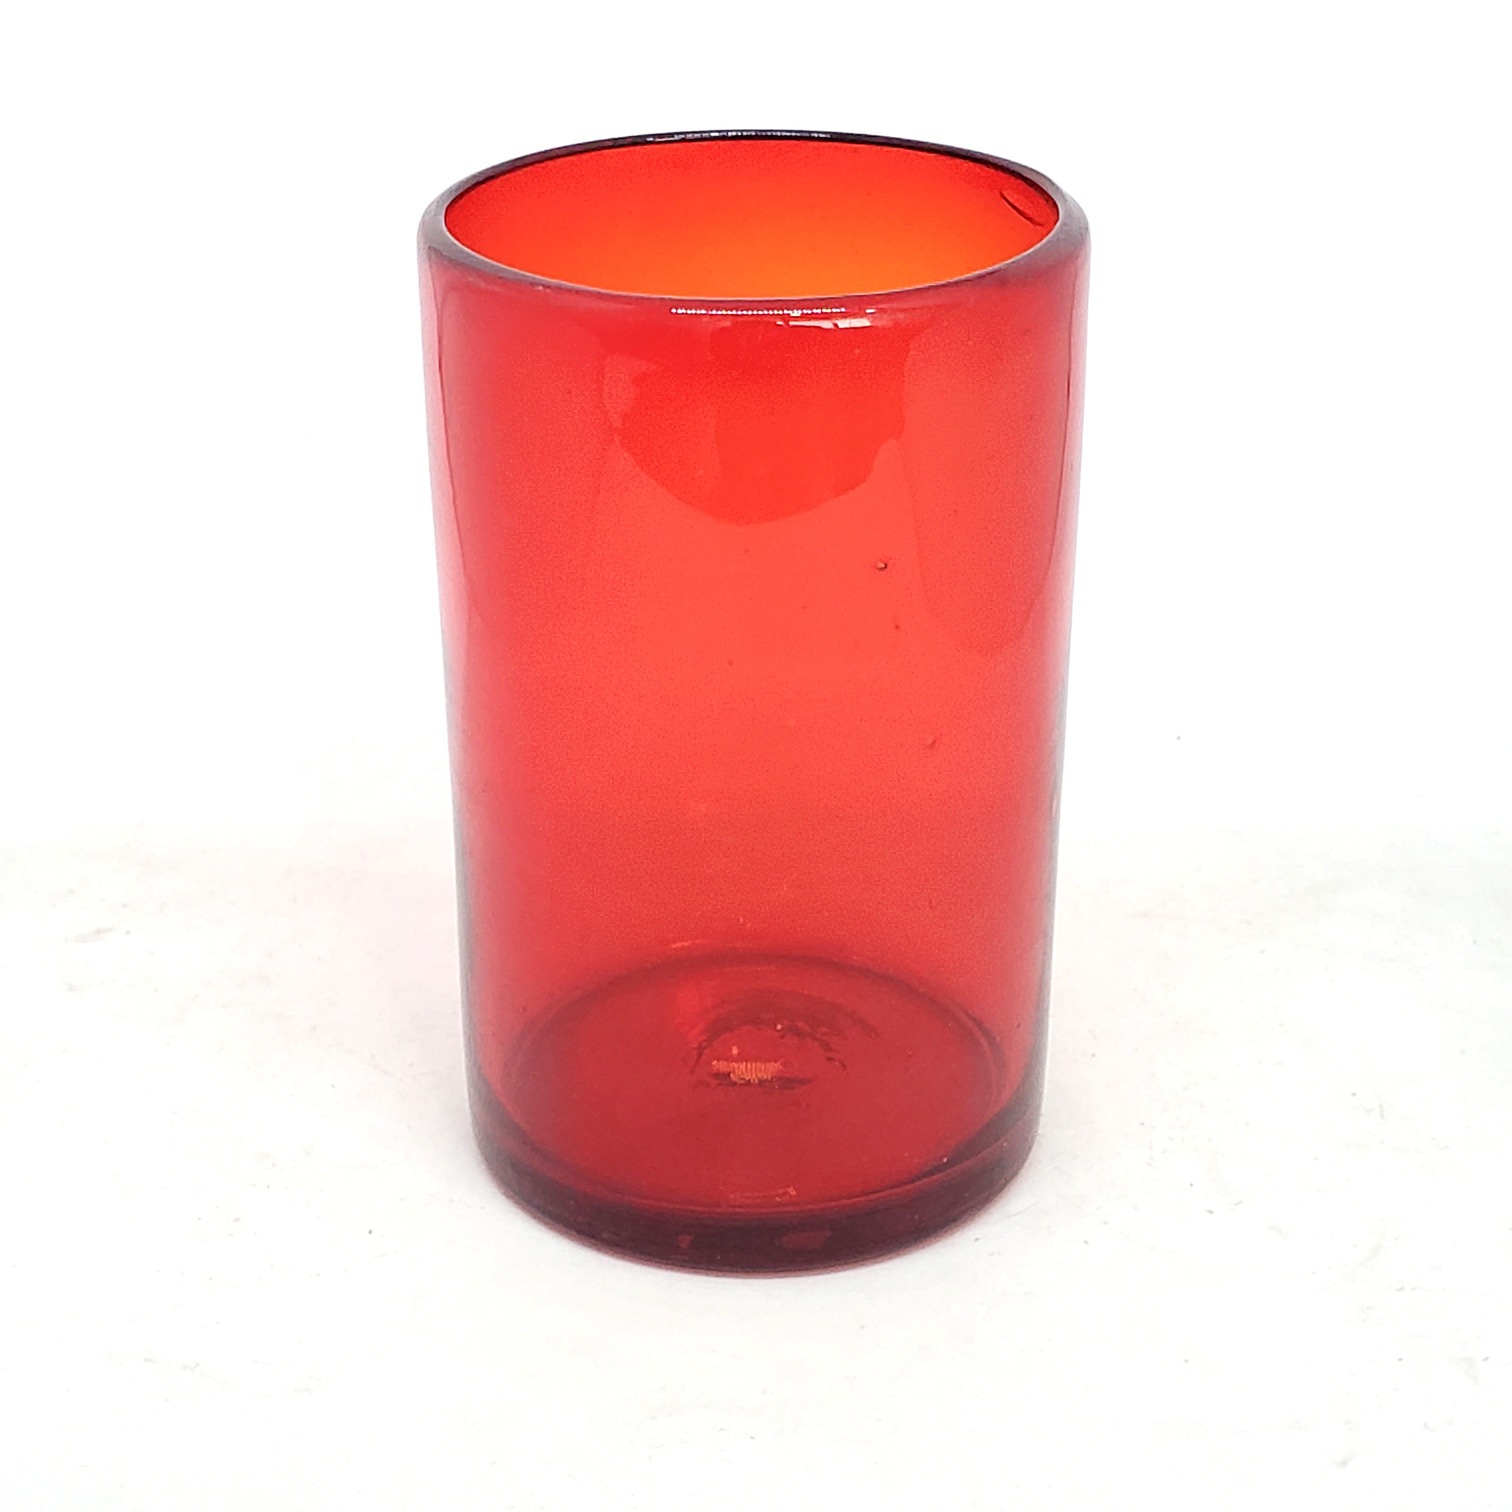 Solid Ruby Red 14 oz Drinking Glasses 6 pcs